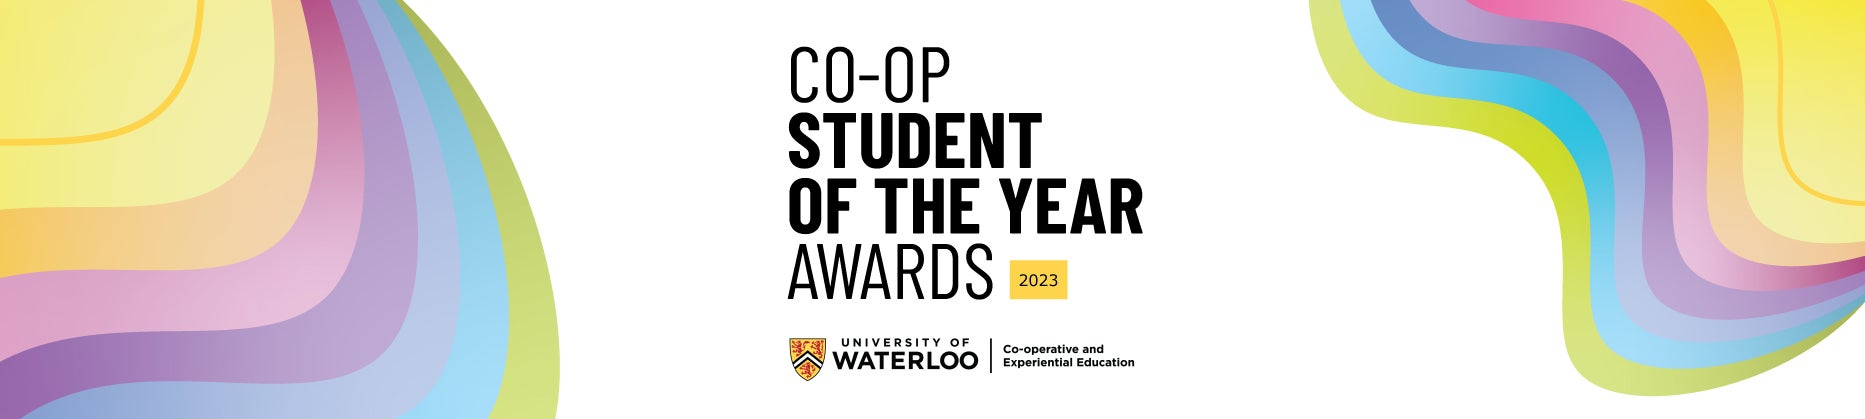 2023 Co-op Student of the Year Awards.